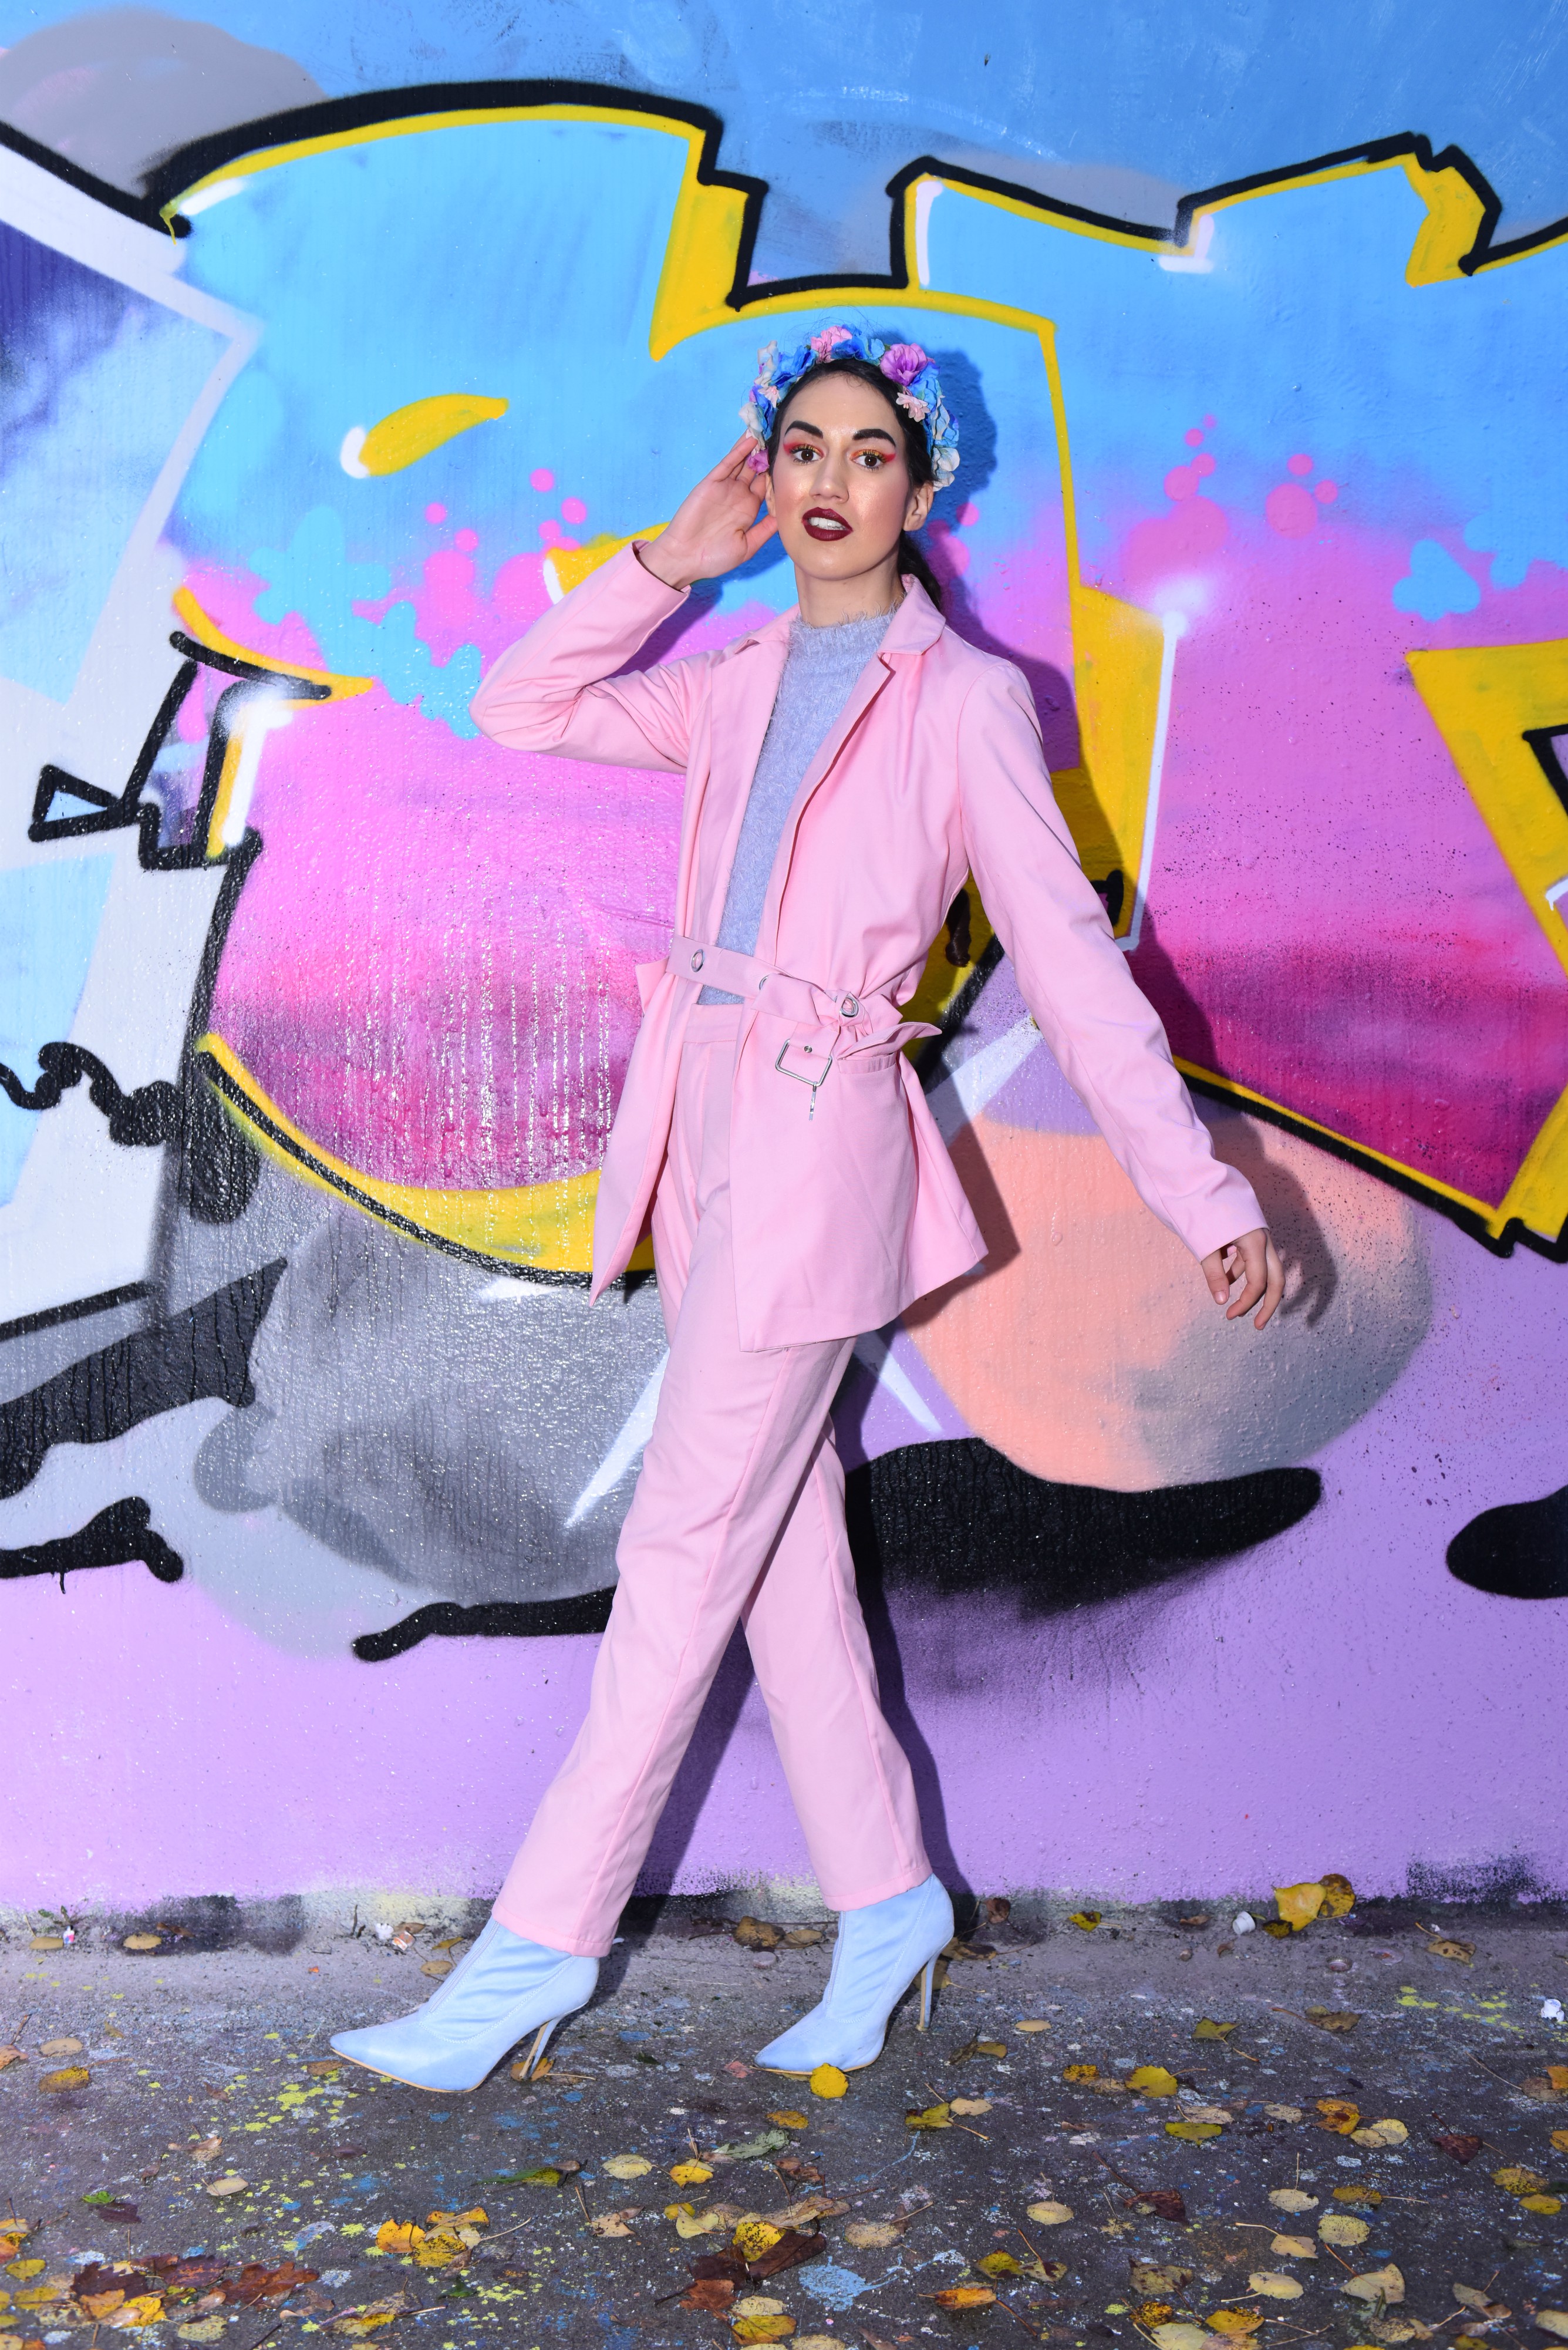 <img src="ana.jpg" alt="ana pink suit and blue boots first date ideas"/> 